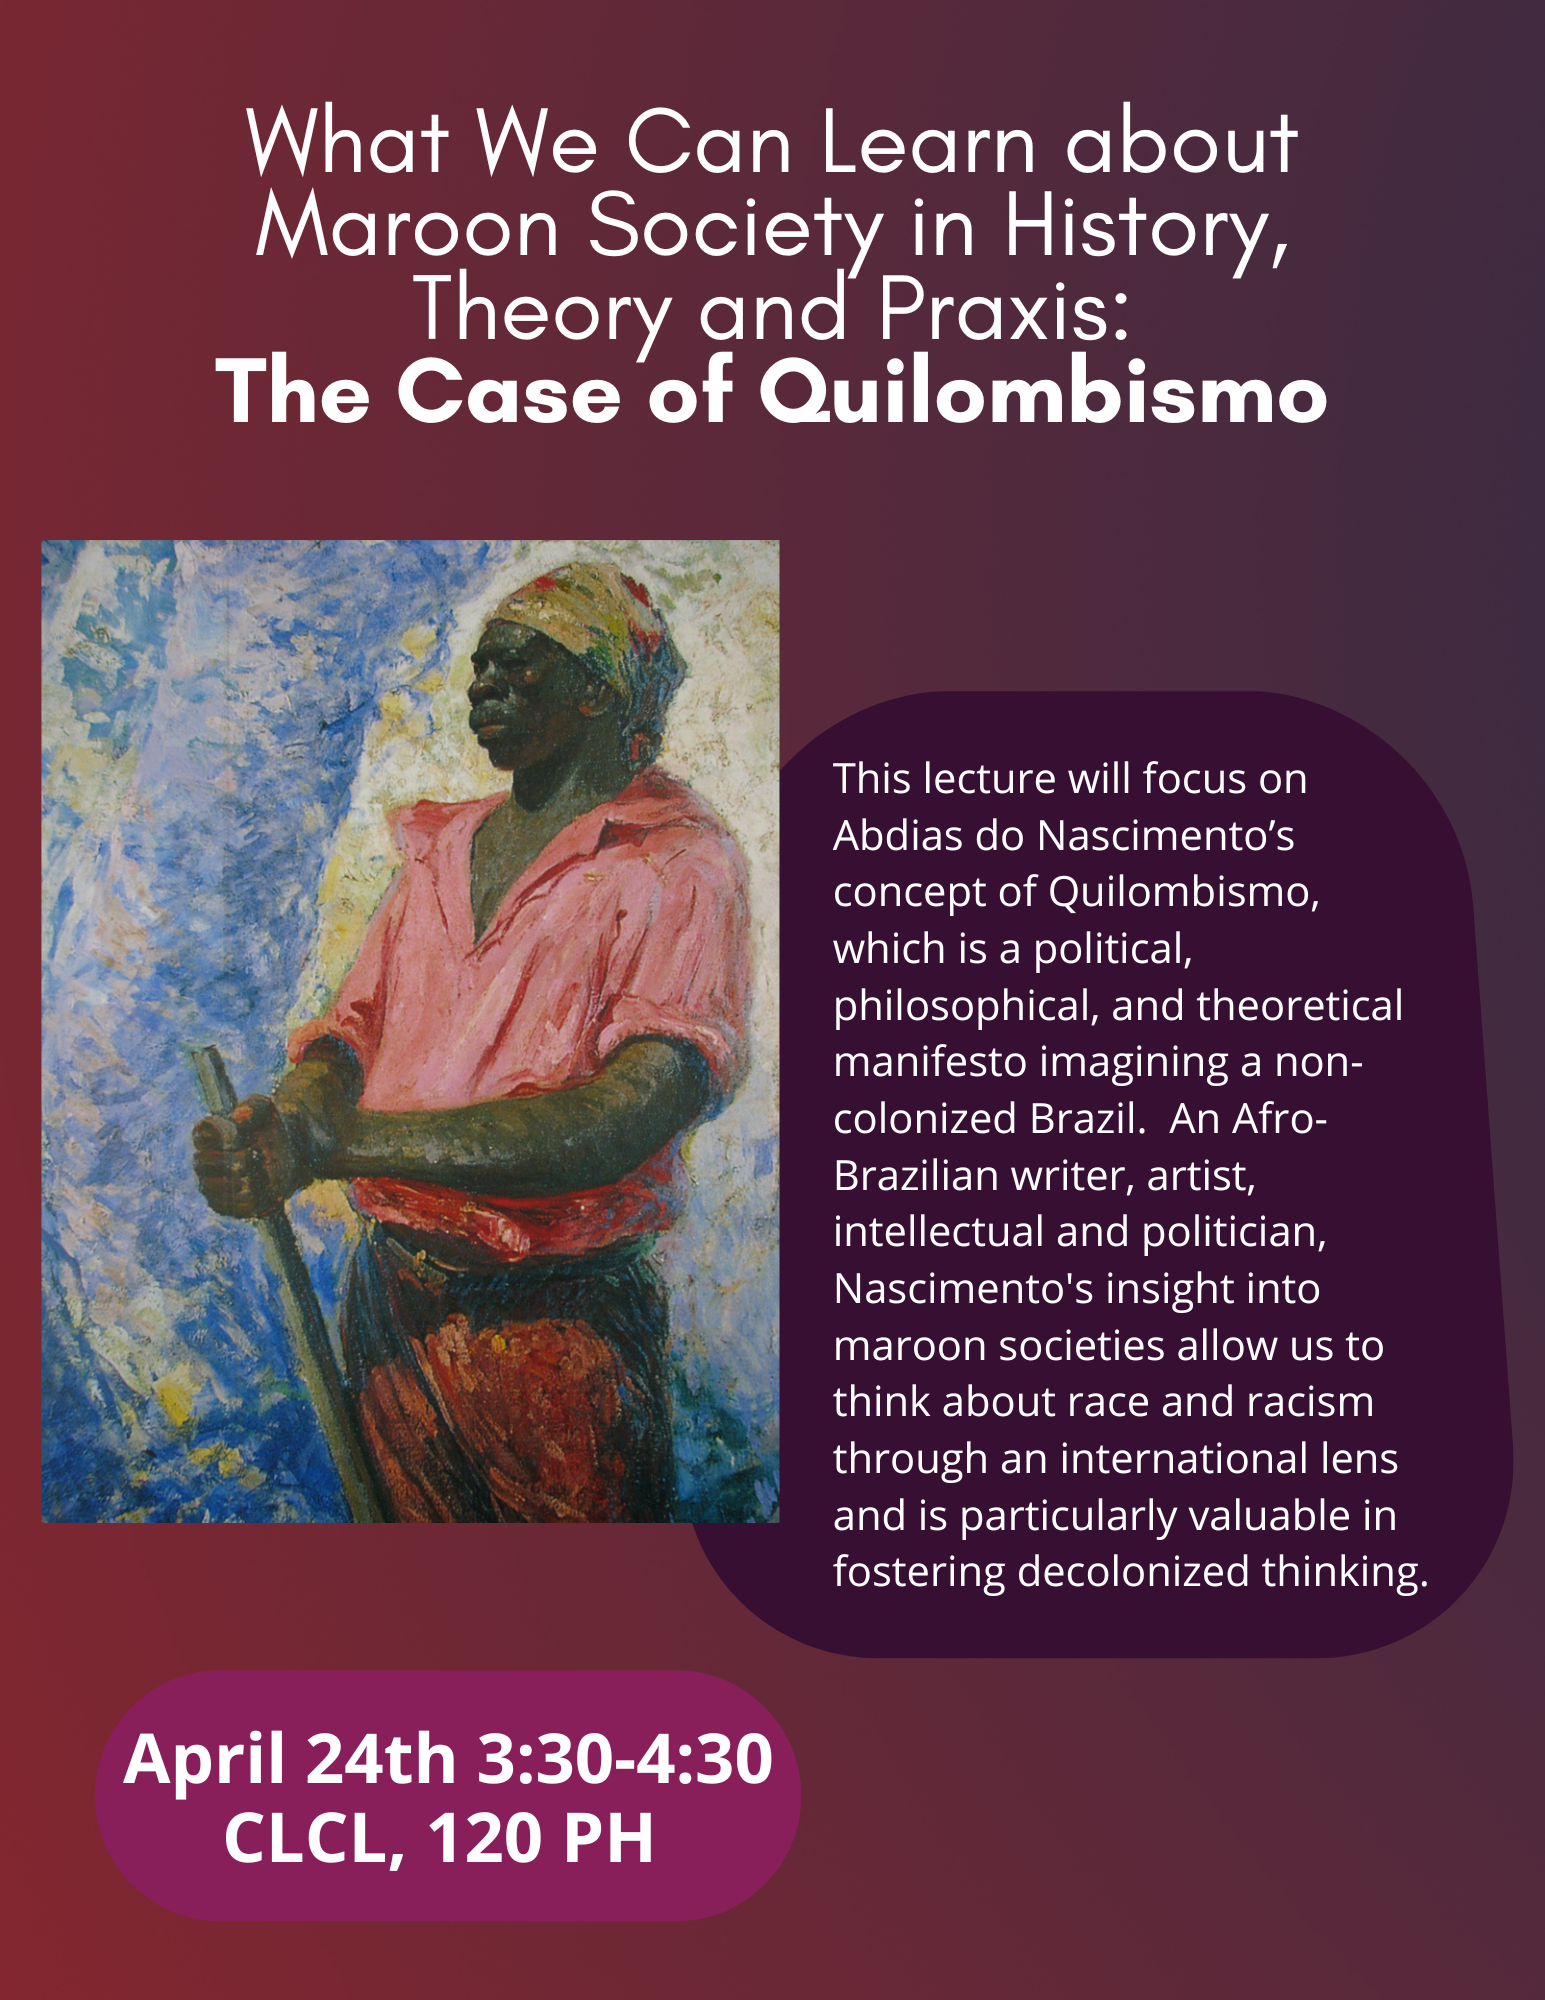 What We Can Learn about Maroon Society in History, Theory and Praxis: The Case of Quilombismo; April 24th, 3:30 - 4:30, CLCL 120 PH